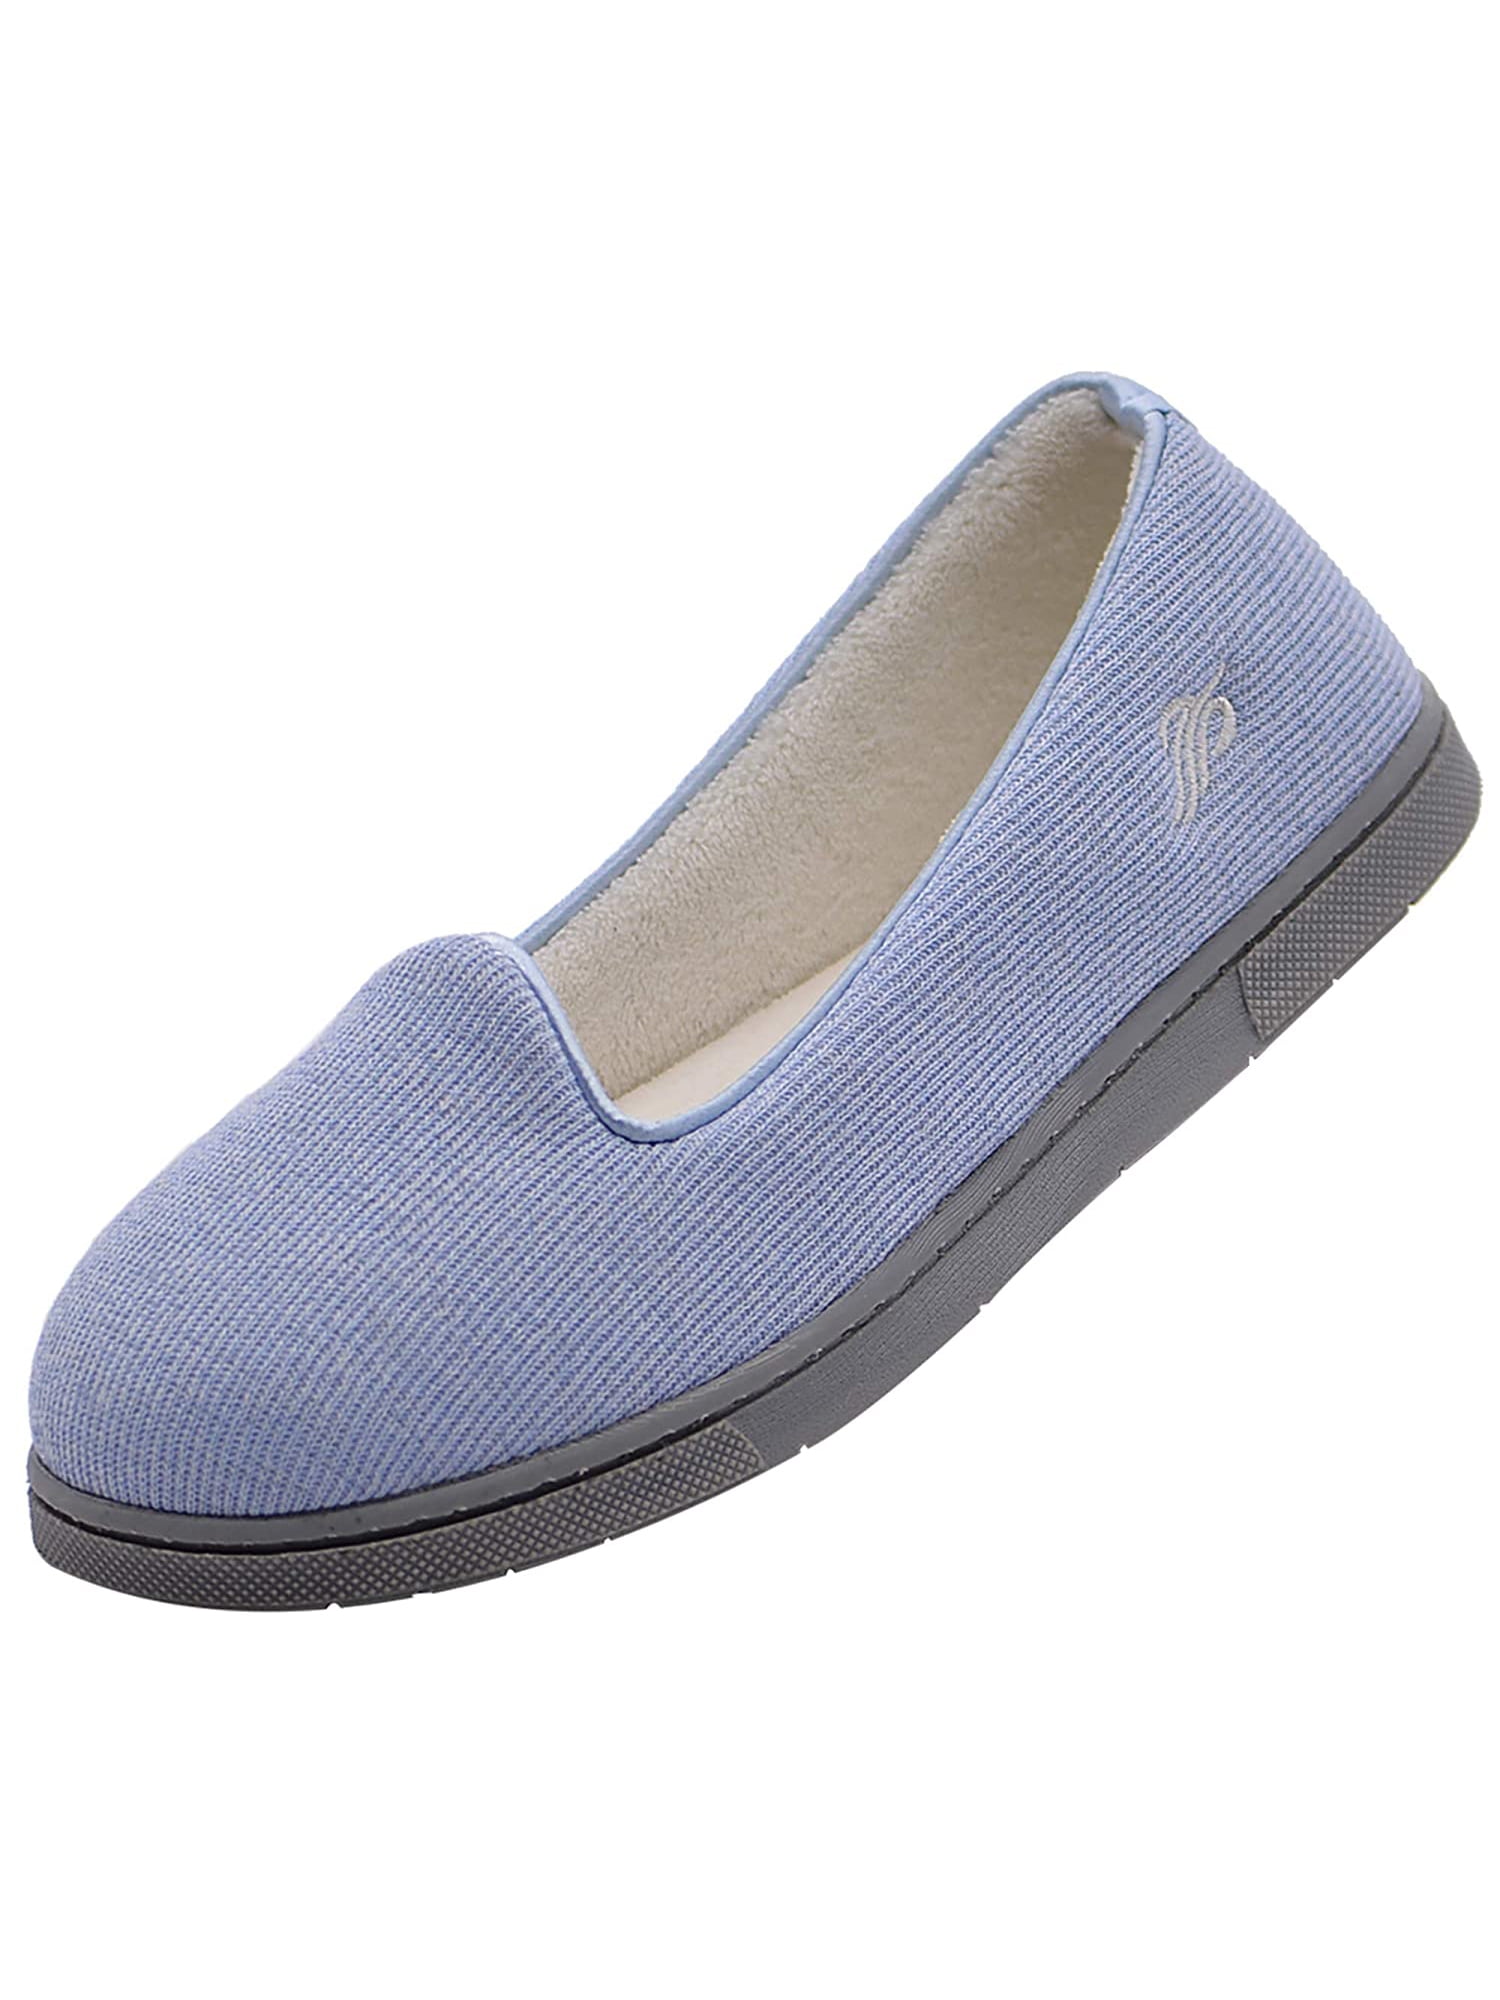 Women's Light Breathable Slippers with Nonslip Sole - Walmart.com